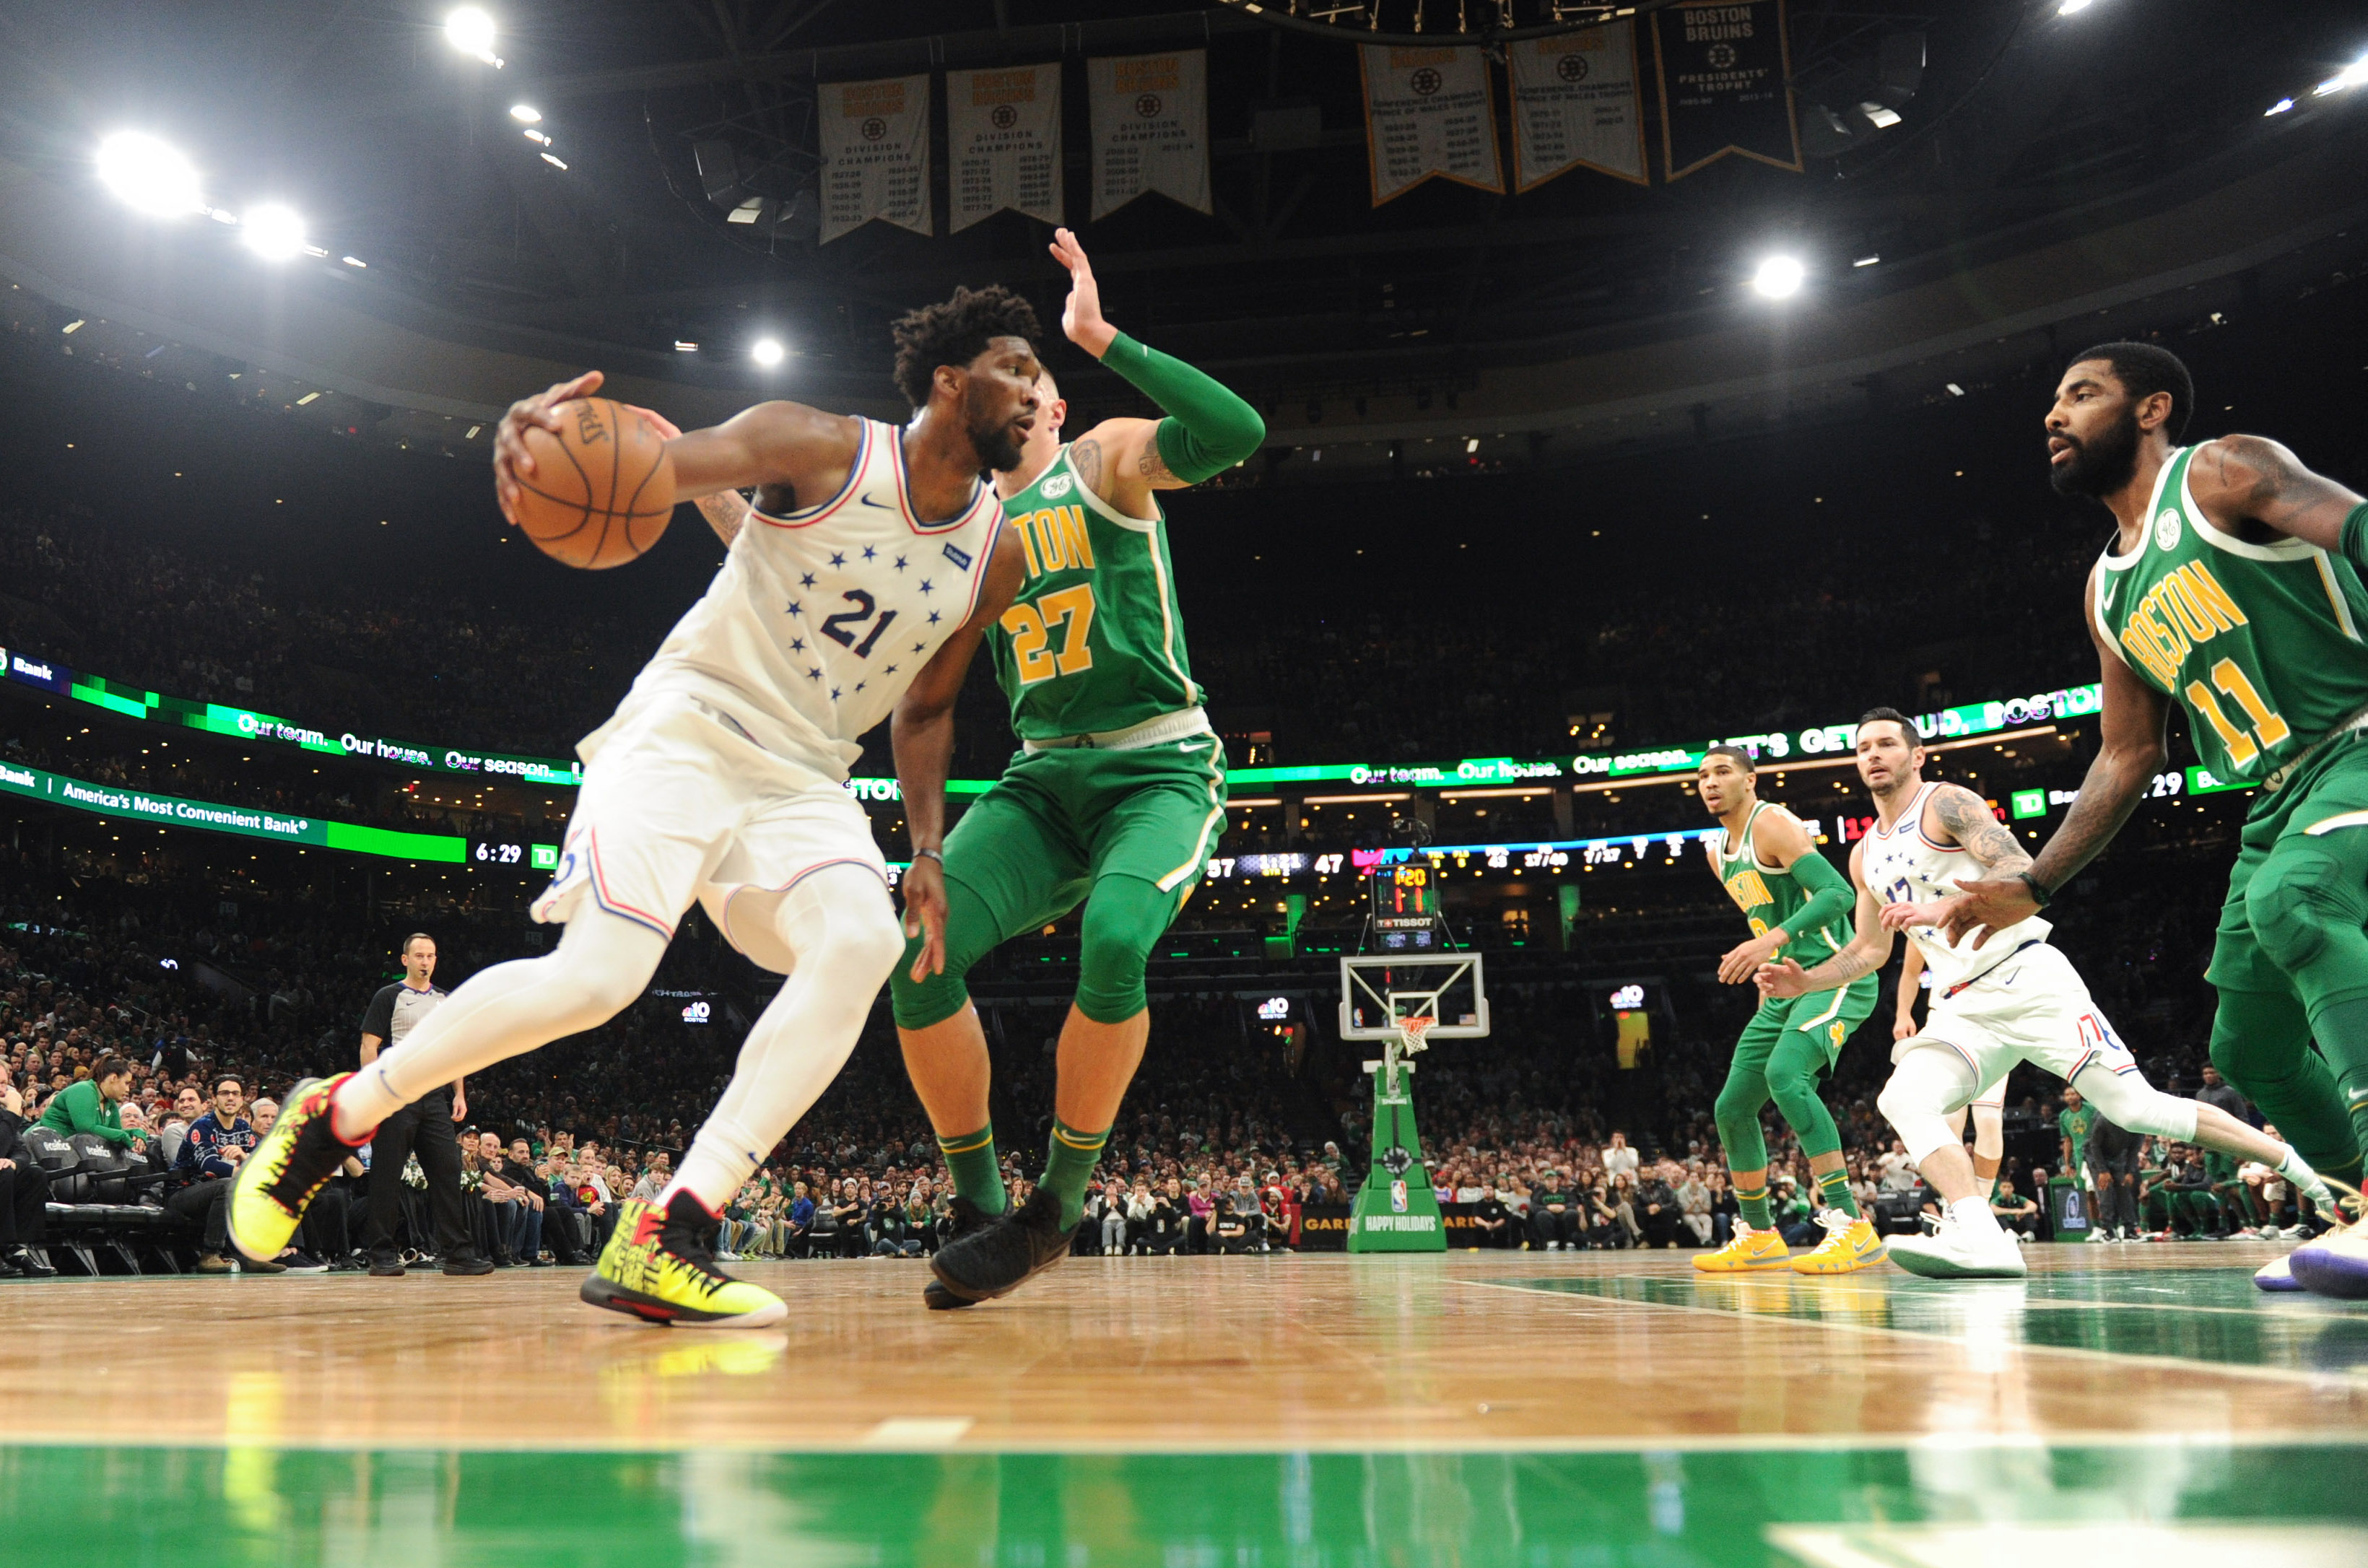 Still Can’t Get It Done – Observations from Celtics 121, Sixers 114 (OT)